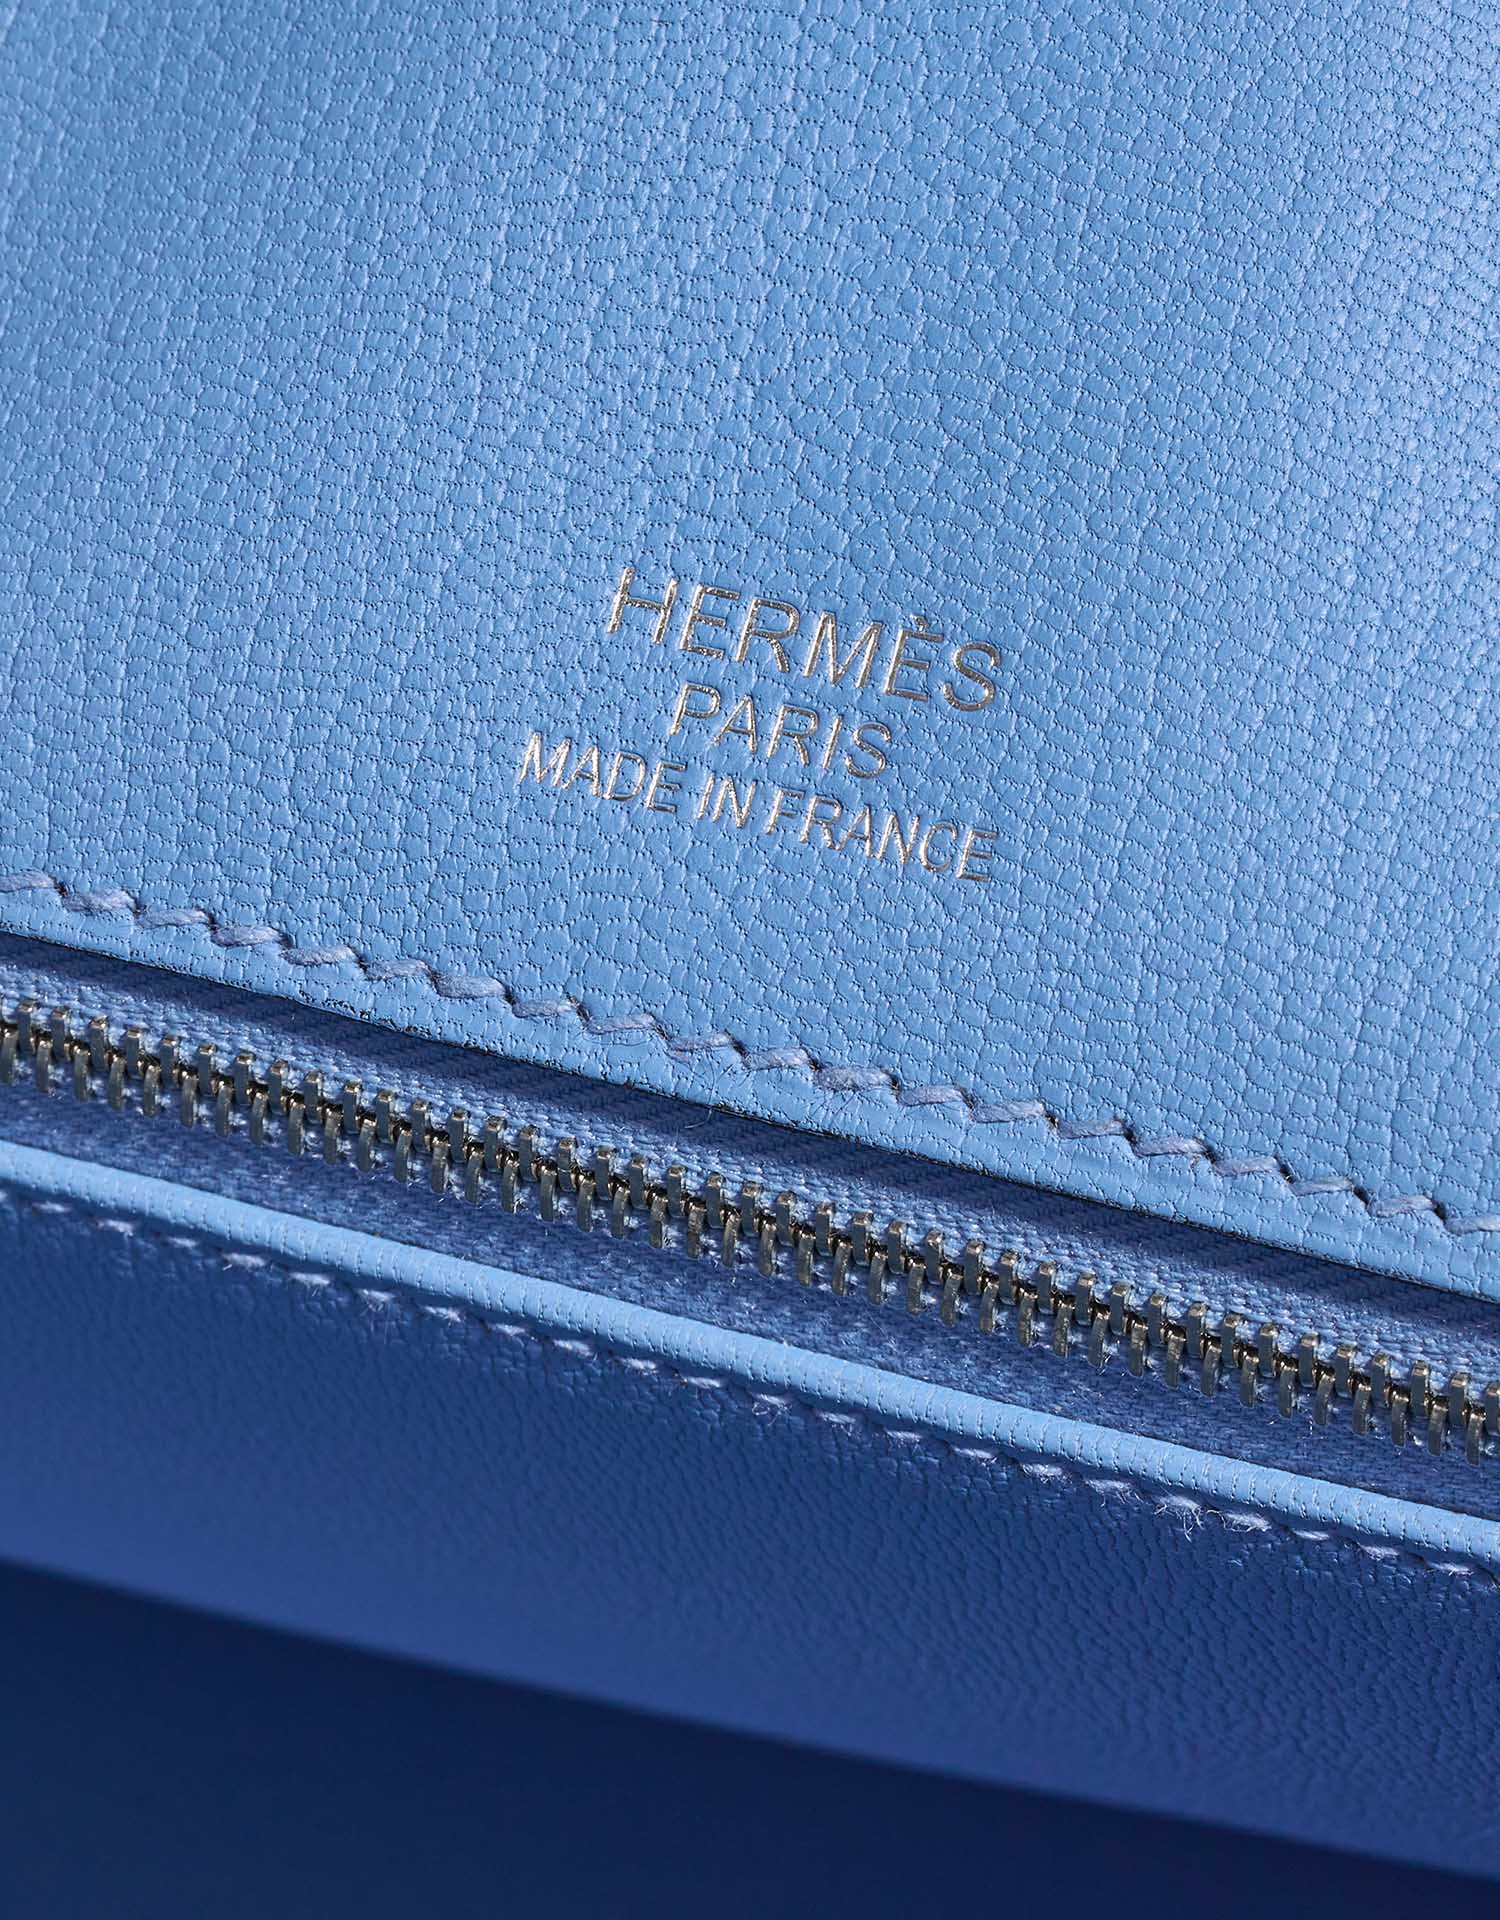 Limited Edition Ghillies Birkin 30 in Blue Paradise Togo and Swift